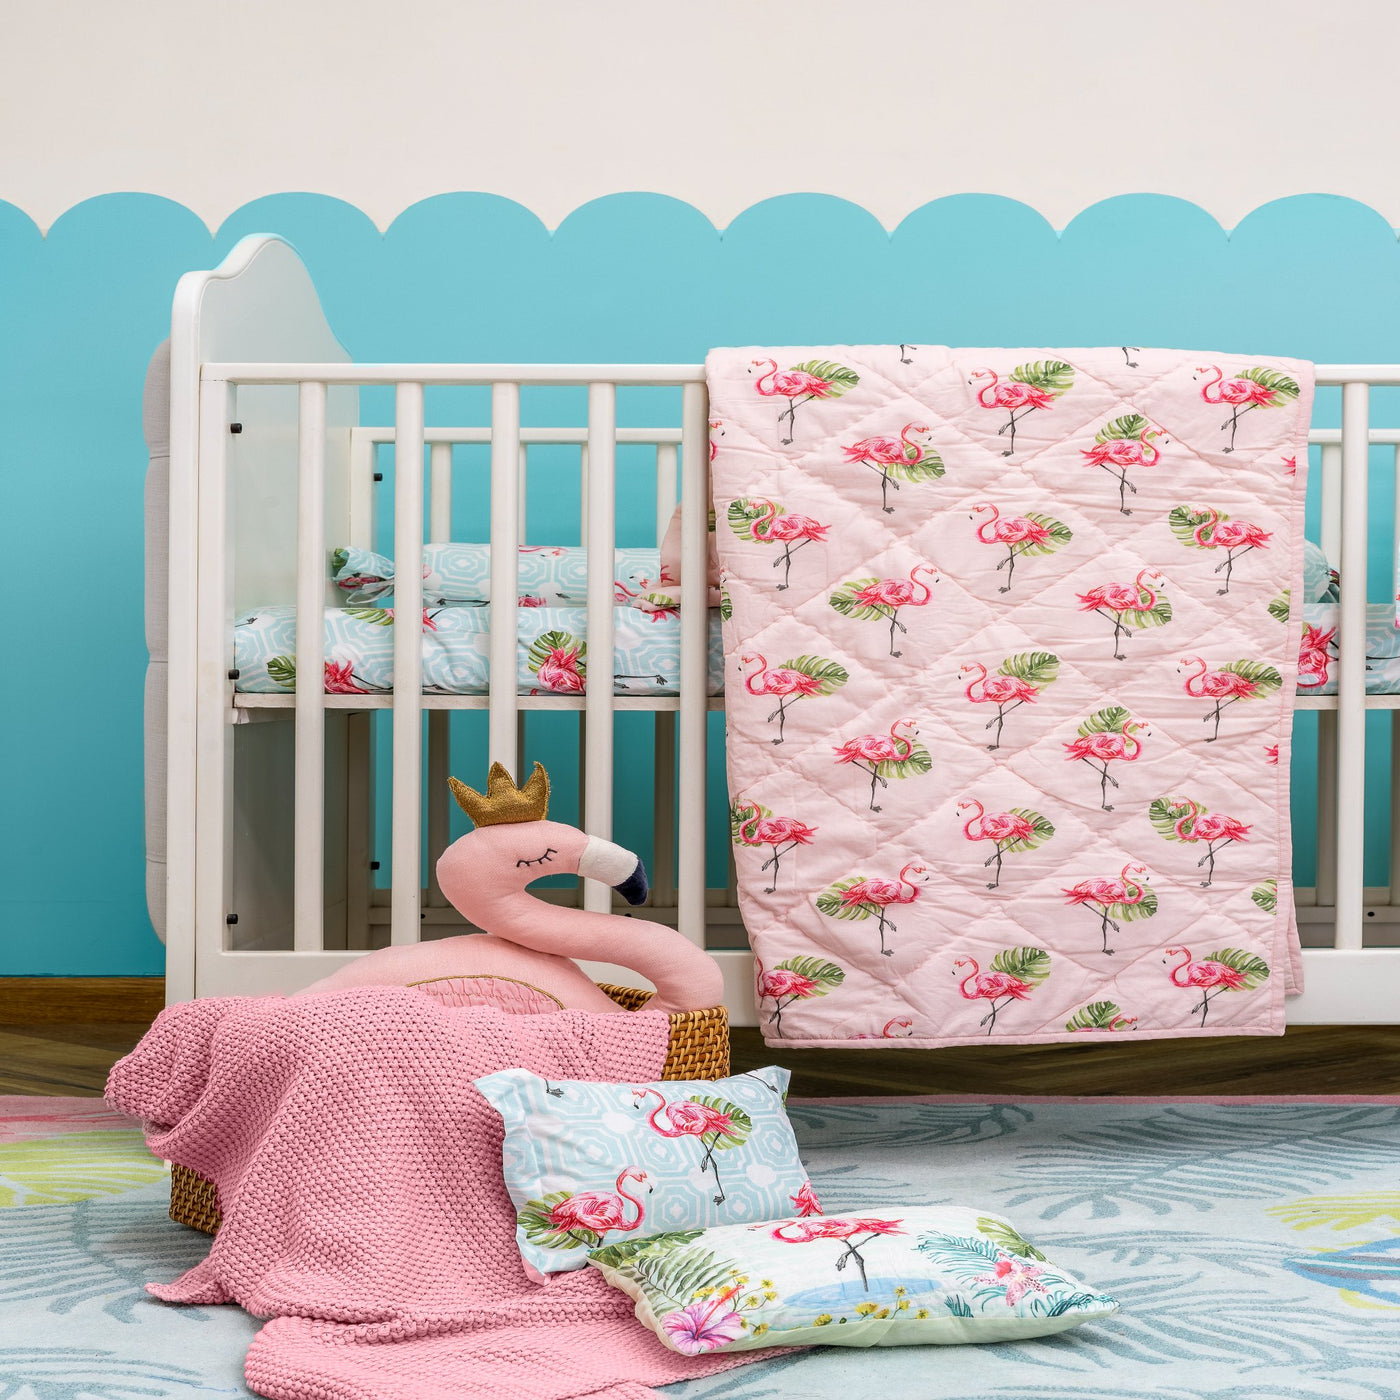 Dancing with the Flamingos Organic Cotton Cot Quilt